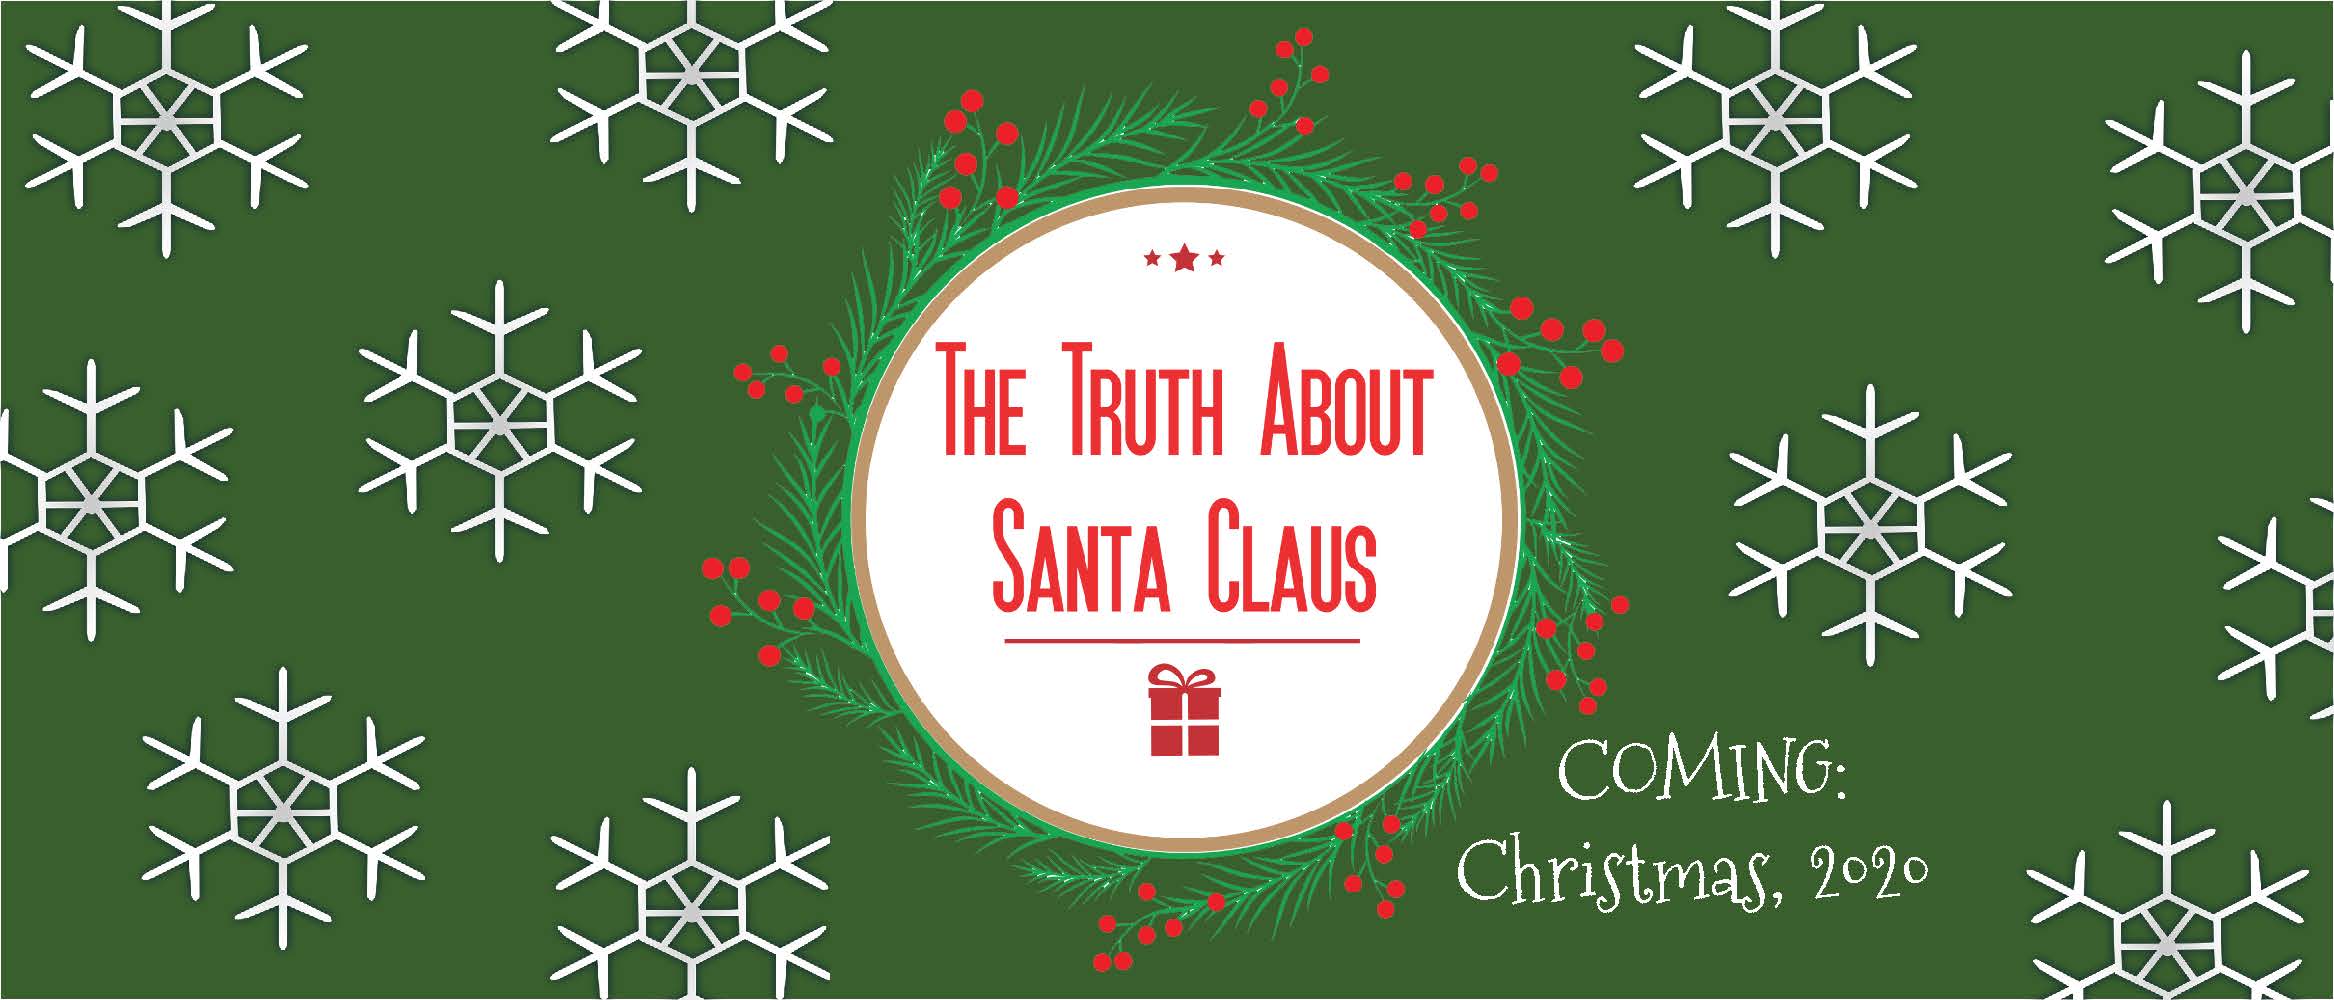 The Truth About Santa Claus (2020) постер